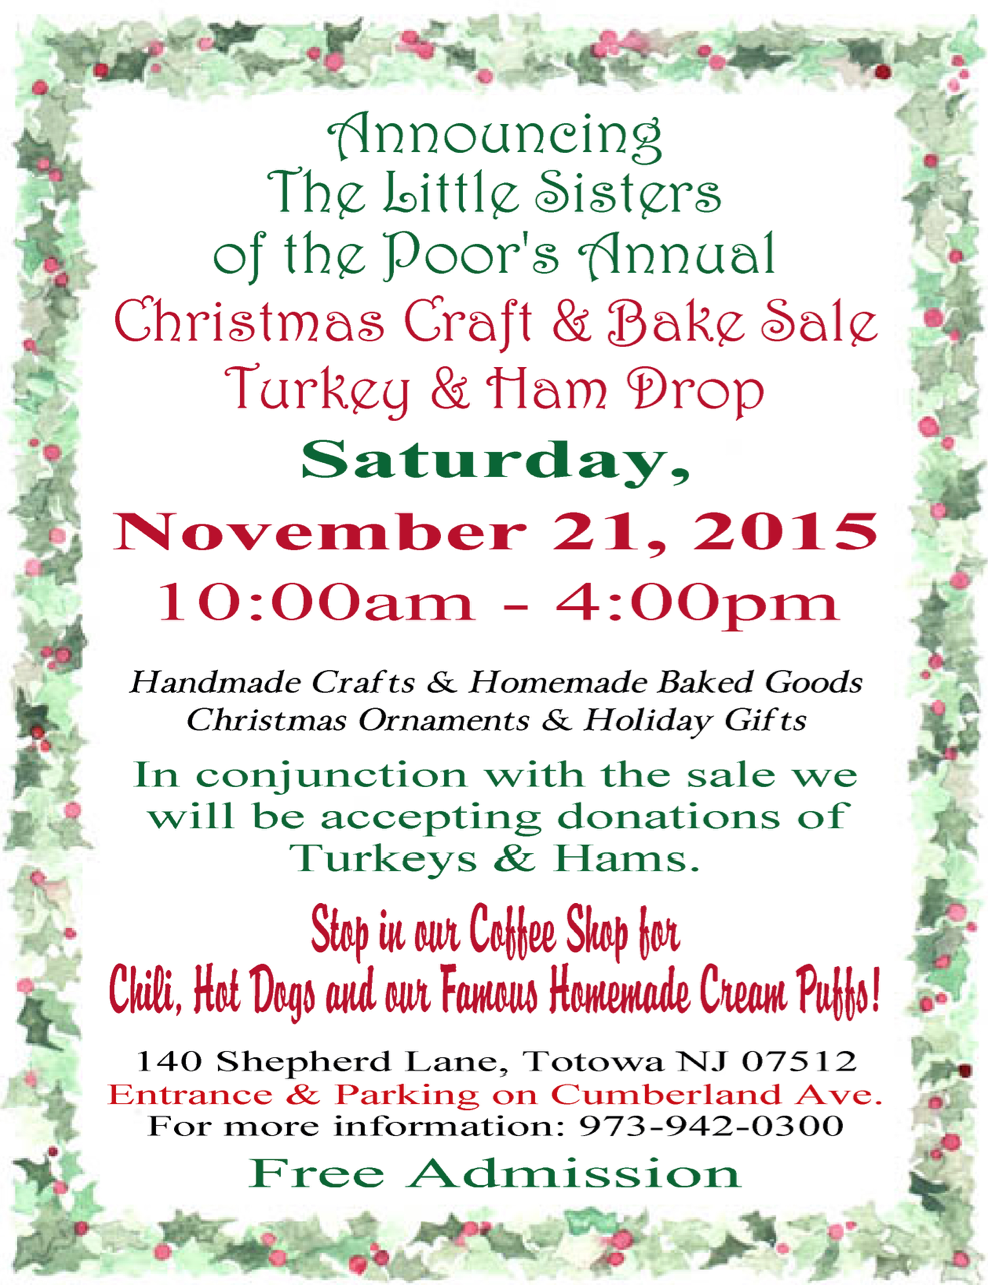 2015 Christmas Craft and Bake Sale - Turkey and Ham Drop - Little ...